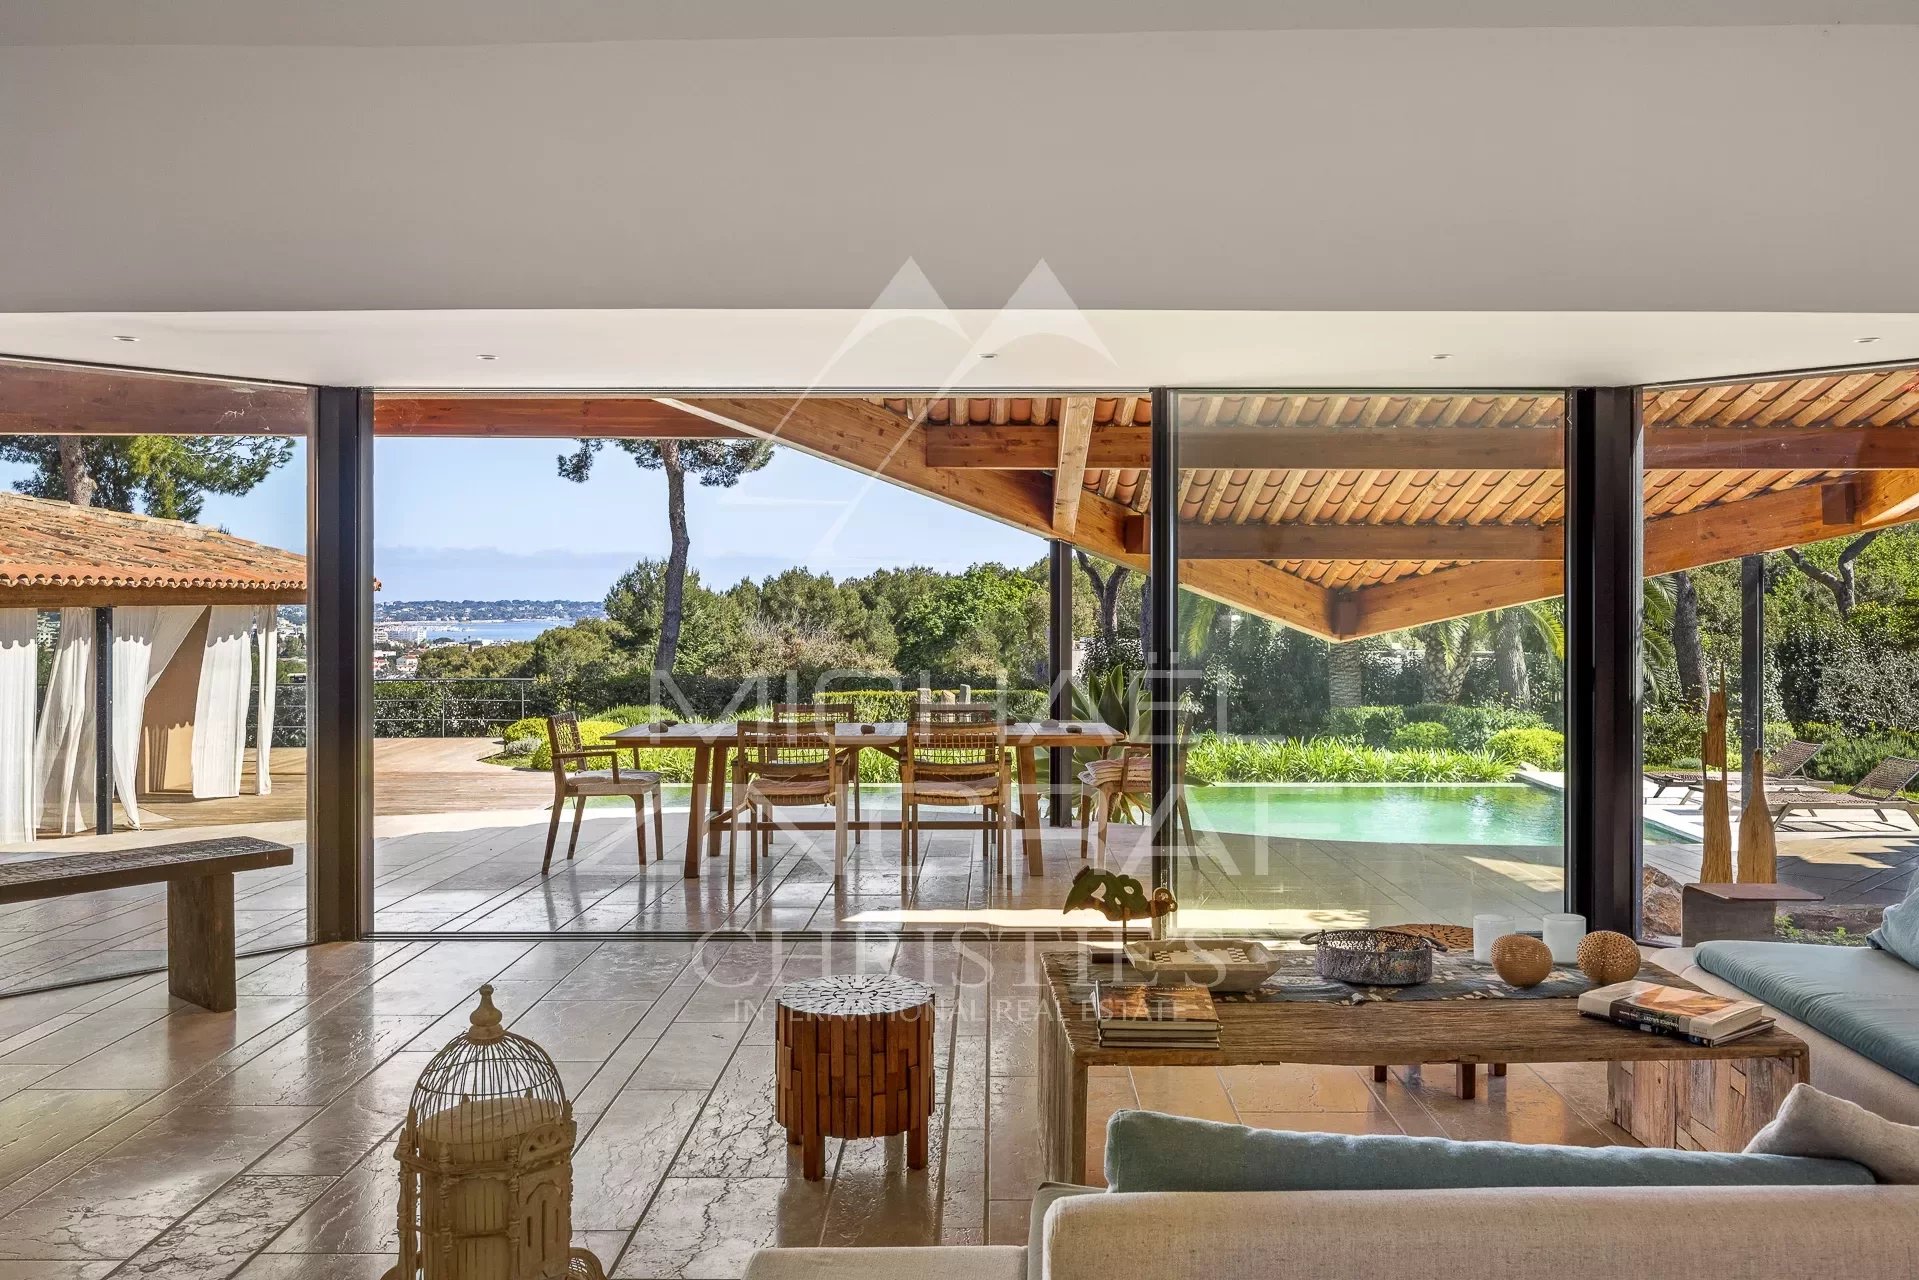 Close to Cannes - Antibes - Exceptional property out of sight